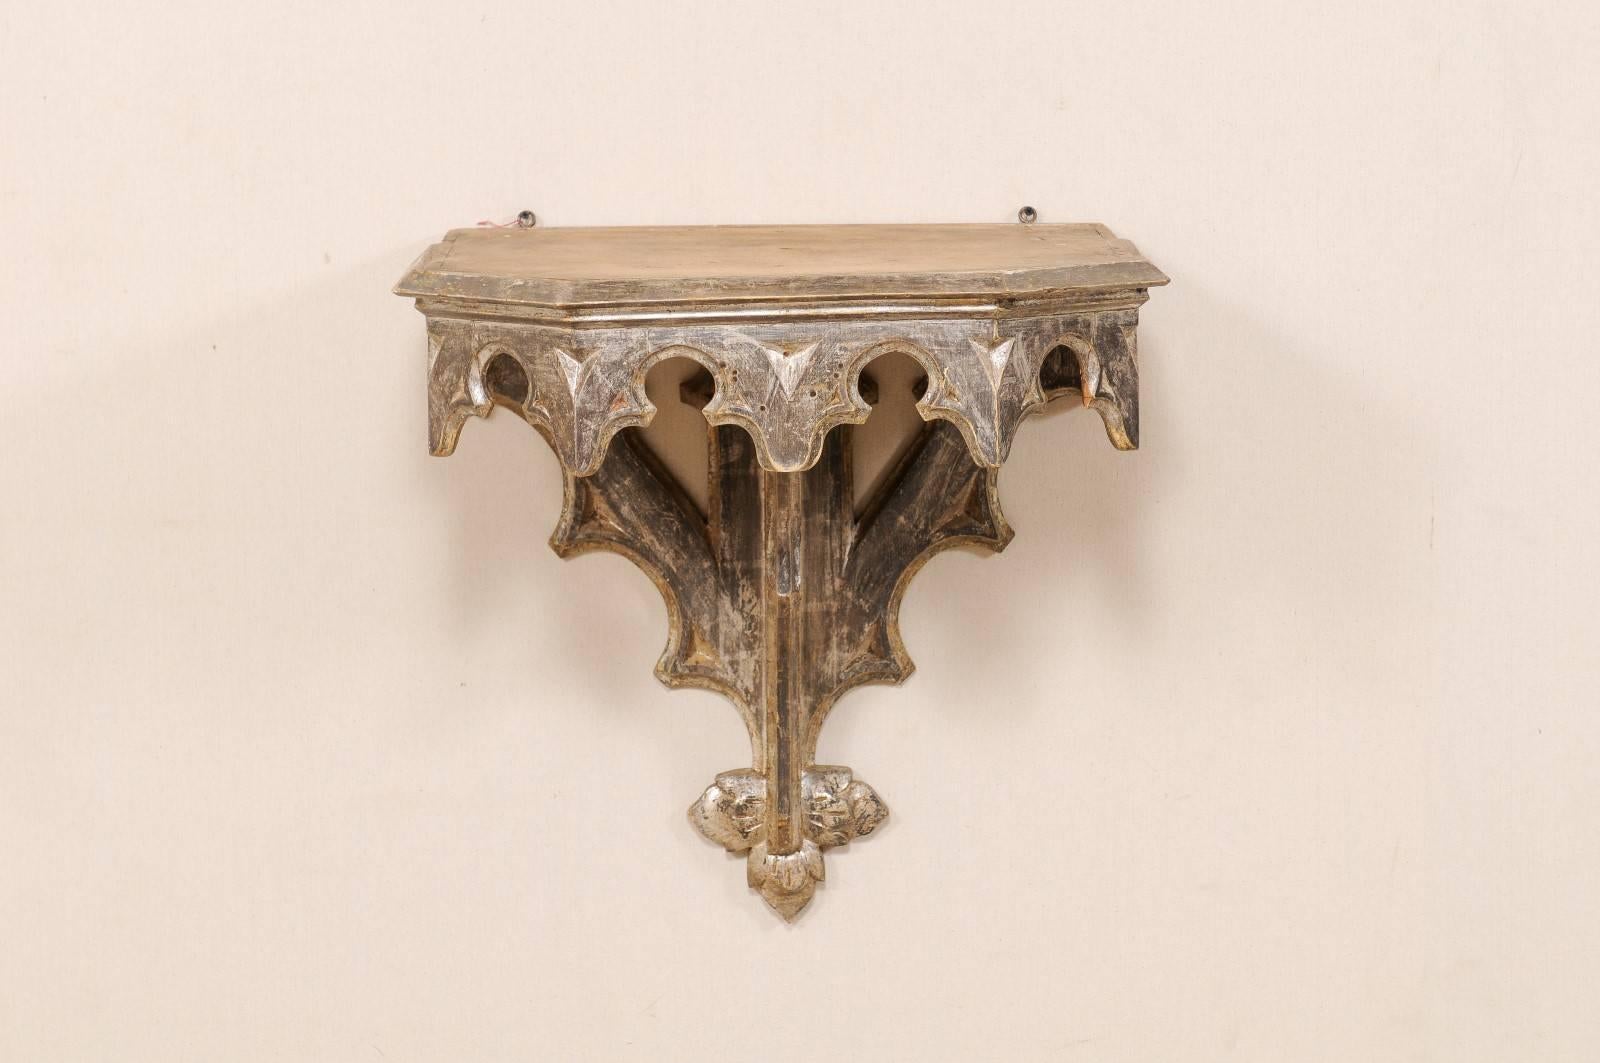 An early 19th century, Italian wall-mounted table. This Italian table from the early 19th century features a silver gilt finish, heavily carved skirt and support braces. The top is more unfinished and natural. This Italian wall mounted table would